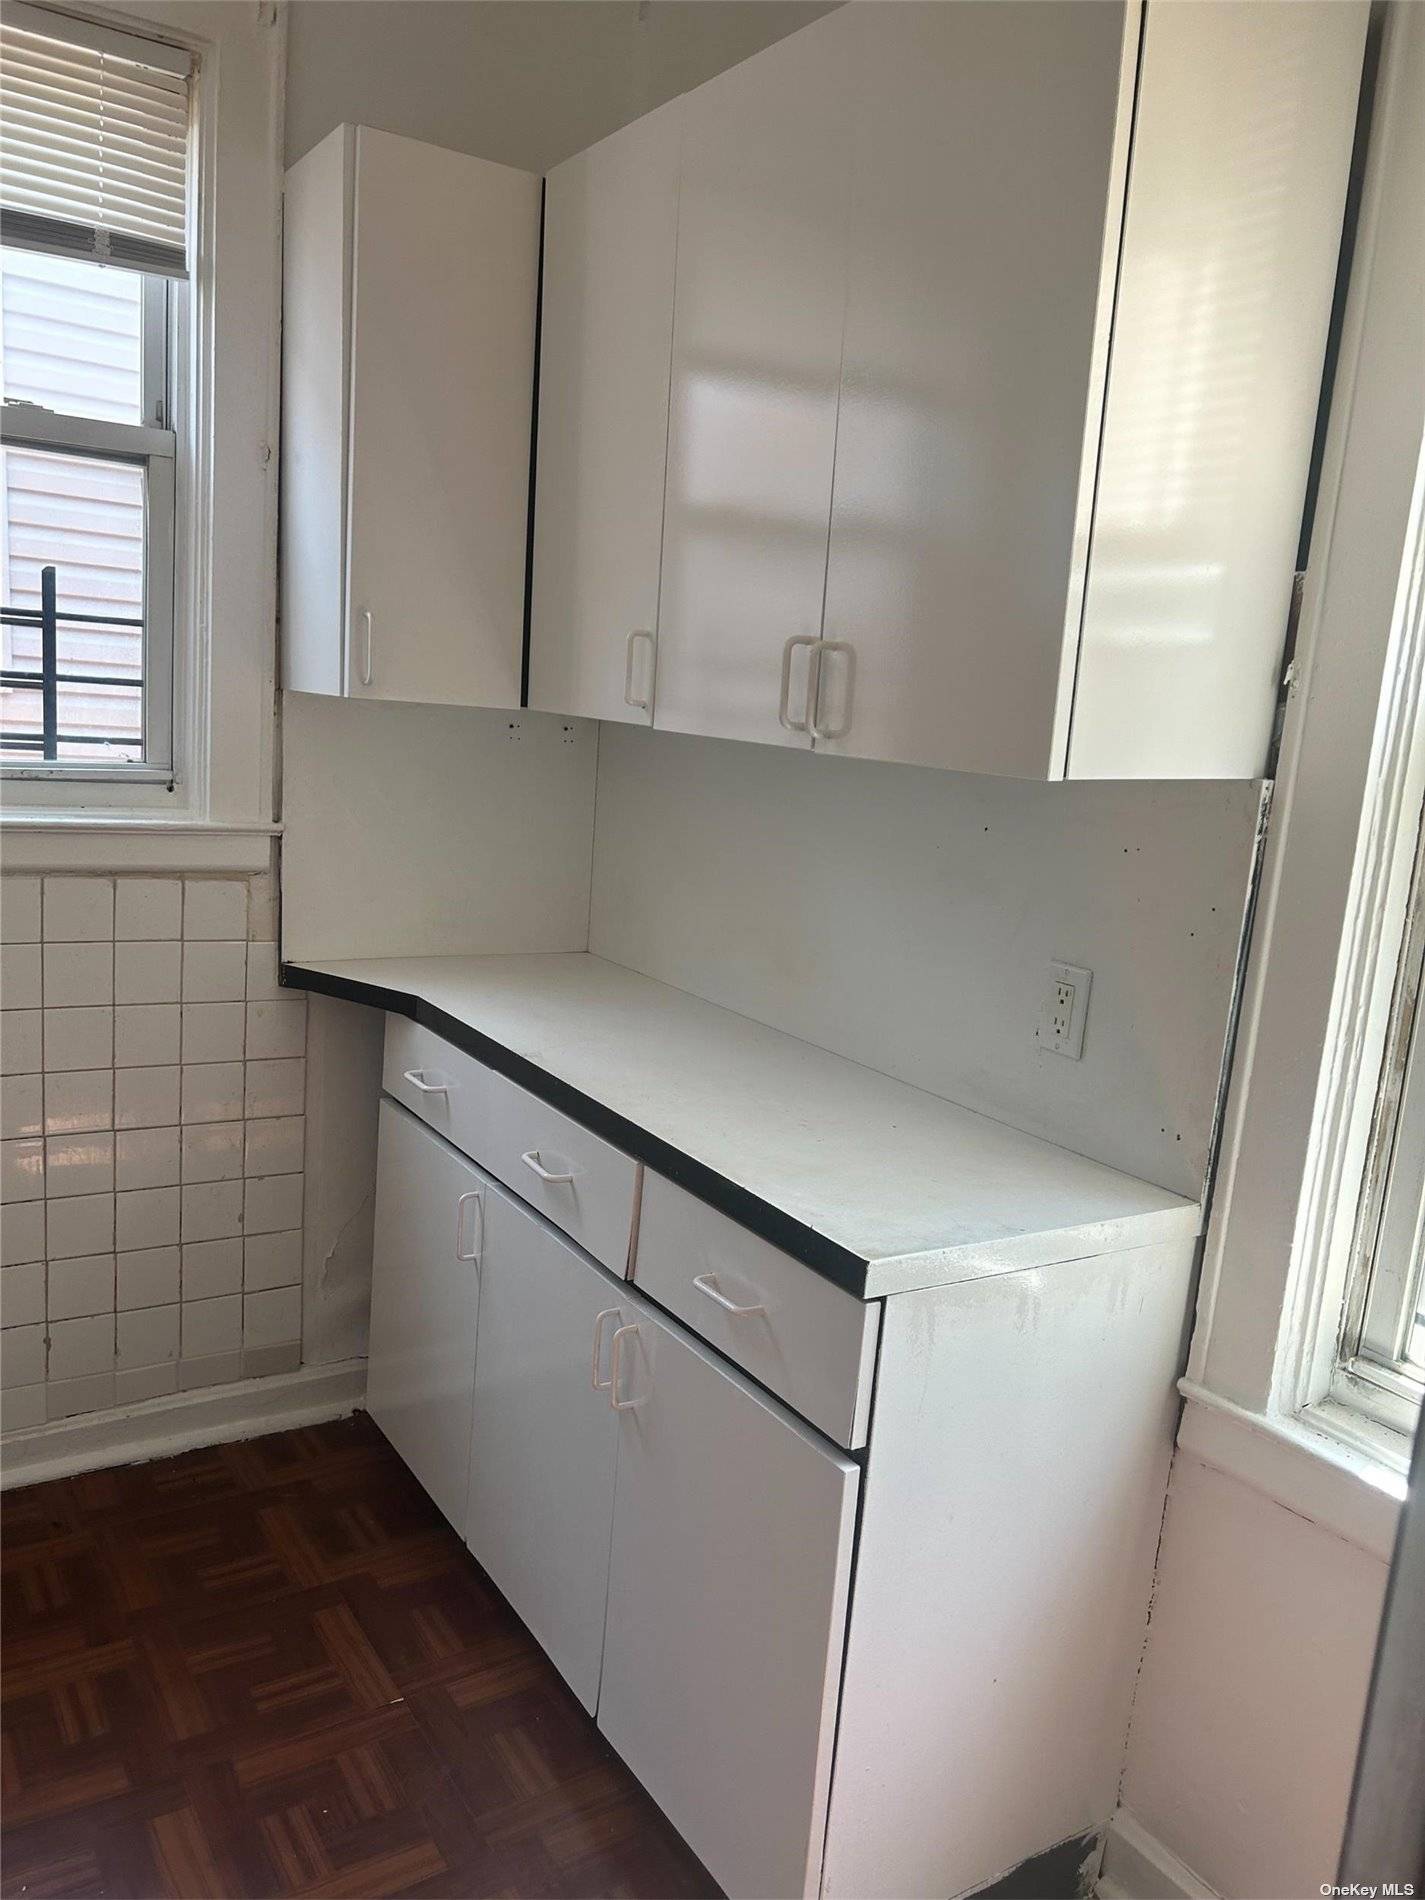 Newly renovated 3 Bedroom apartment in Throgs Neck area of the Bronx.